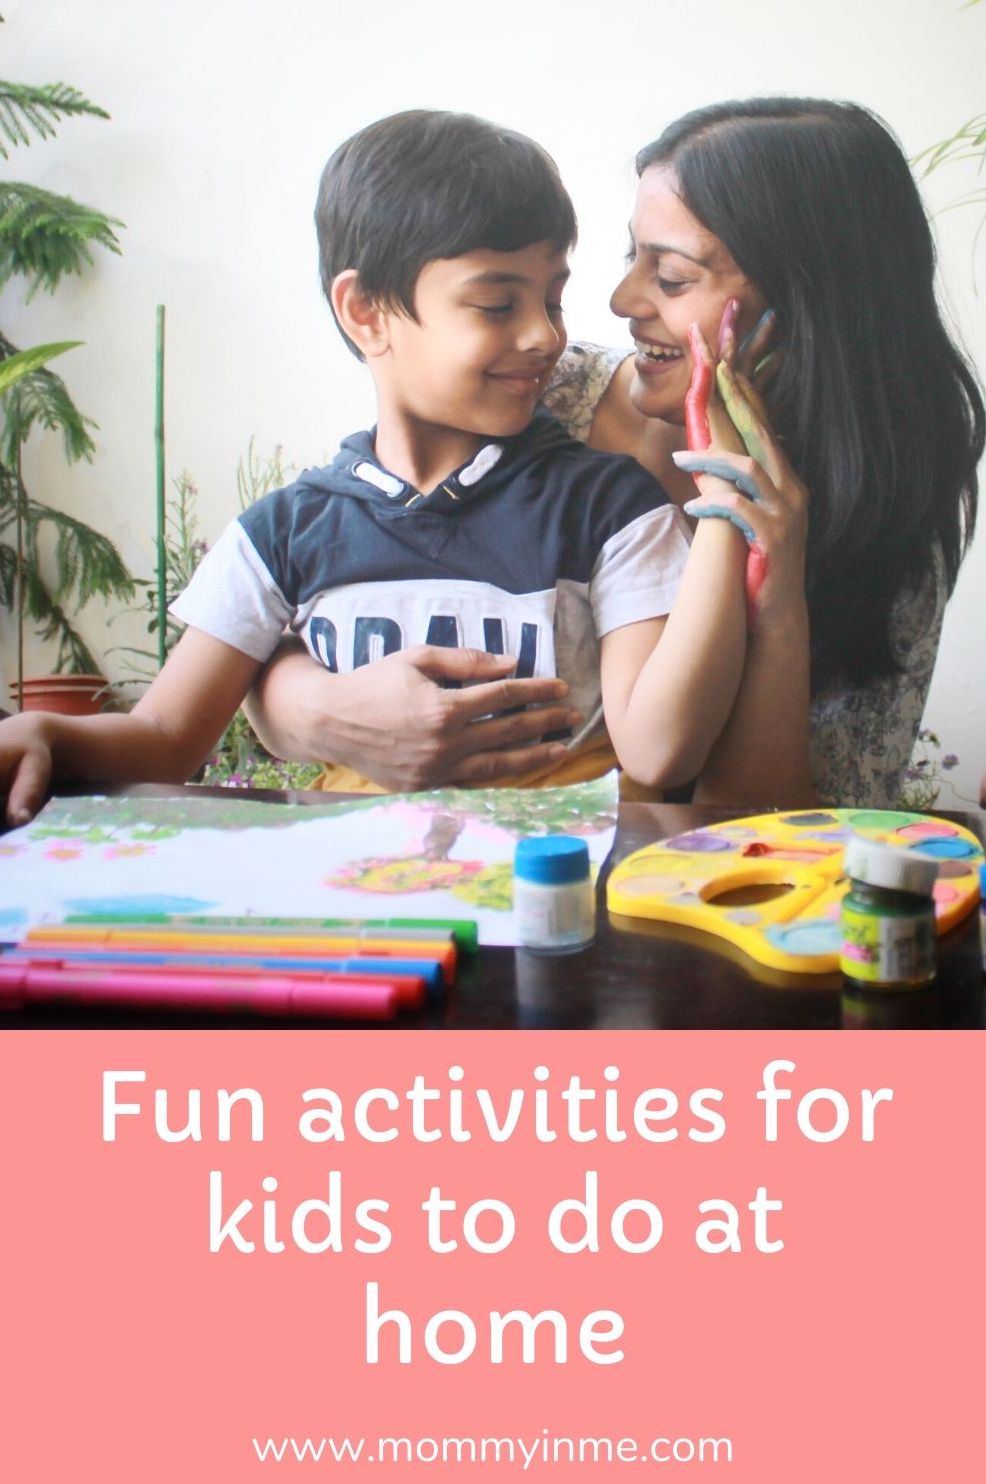 While we all are locked down due to COVID-19, it is important that we keep the fun with kids. Here are 10 Fun activities for Kids to do at home #quarantine #activitiesforkids #kidscrafts #lockdownactivities